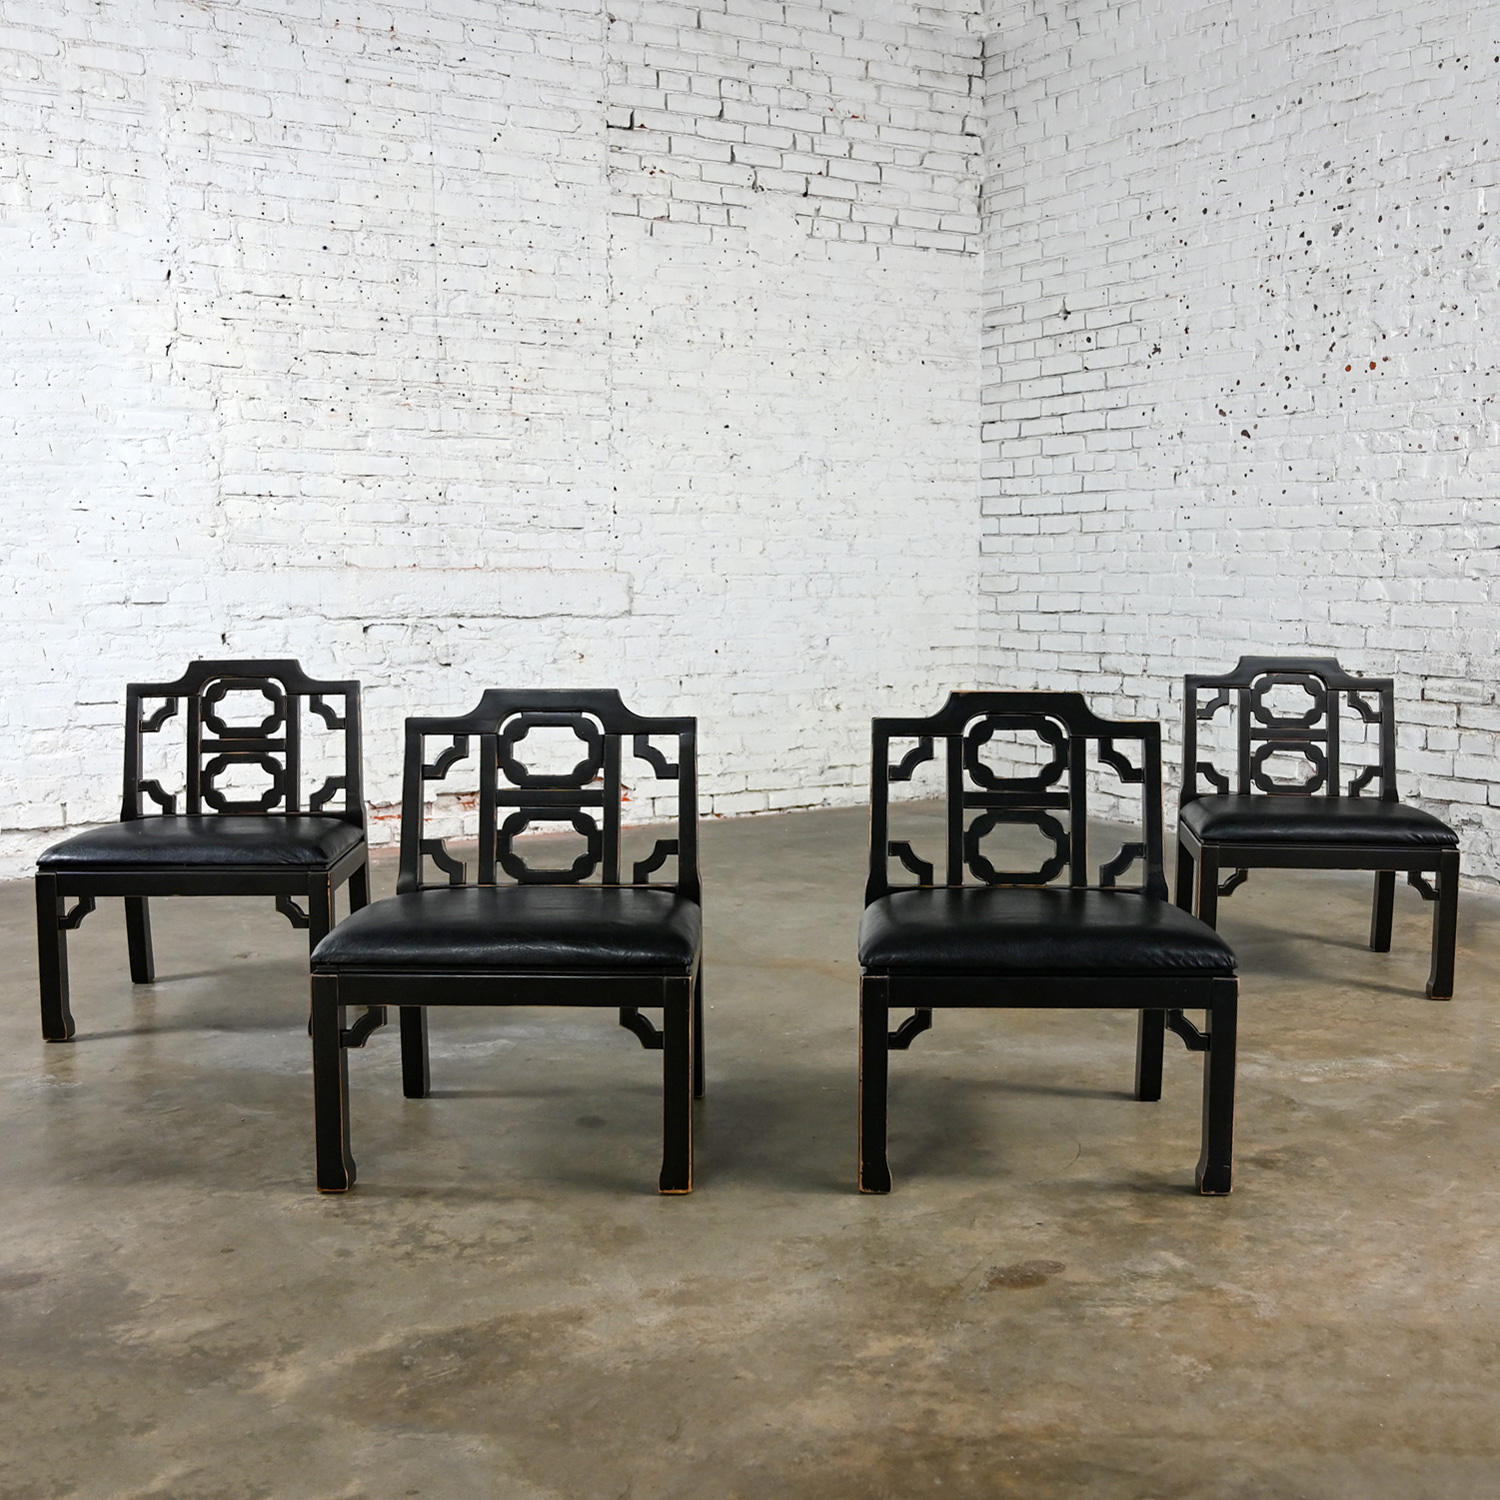 1971 Hollywood Regency Chinoiserie Chinese Chippendale Style Occasional Chairs by Thomasville Black Low Profile Set of 4